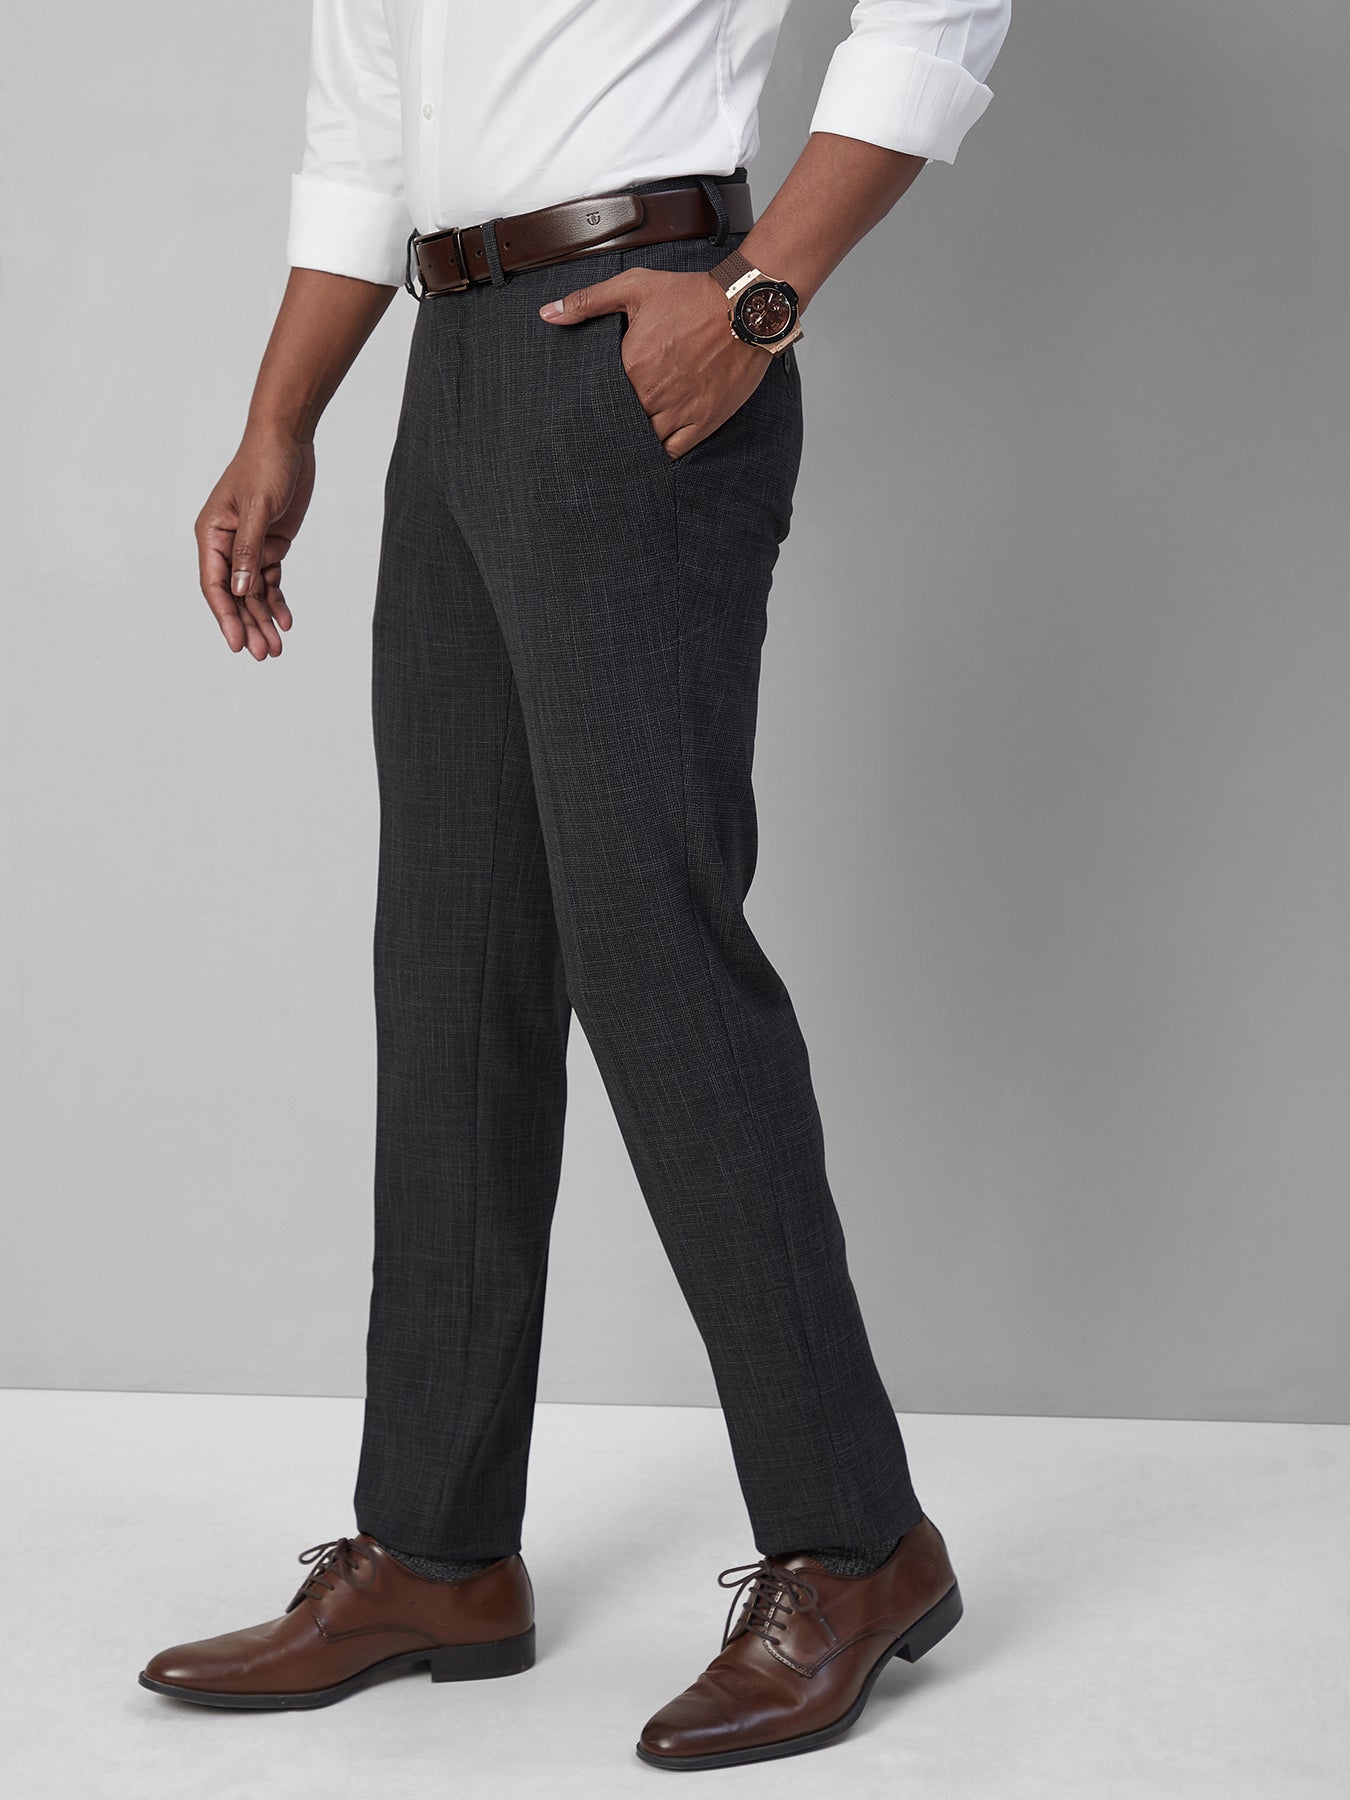 PV Plain Ready Made Black Stitched Trouser/Pant, Men at Rs 400/piece in  Mumbai